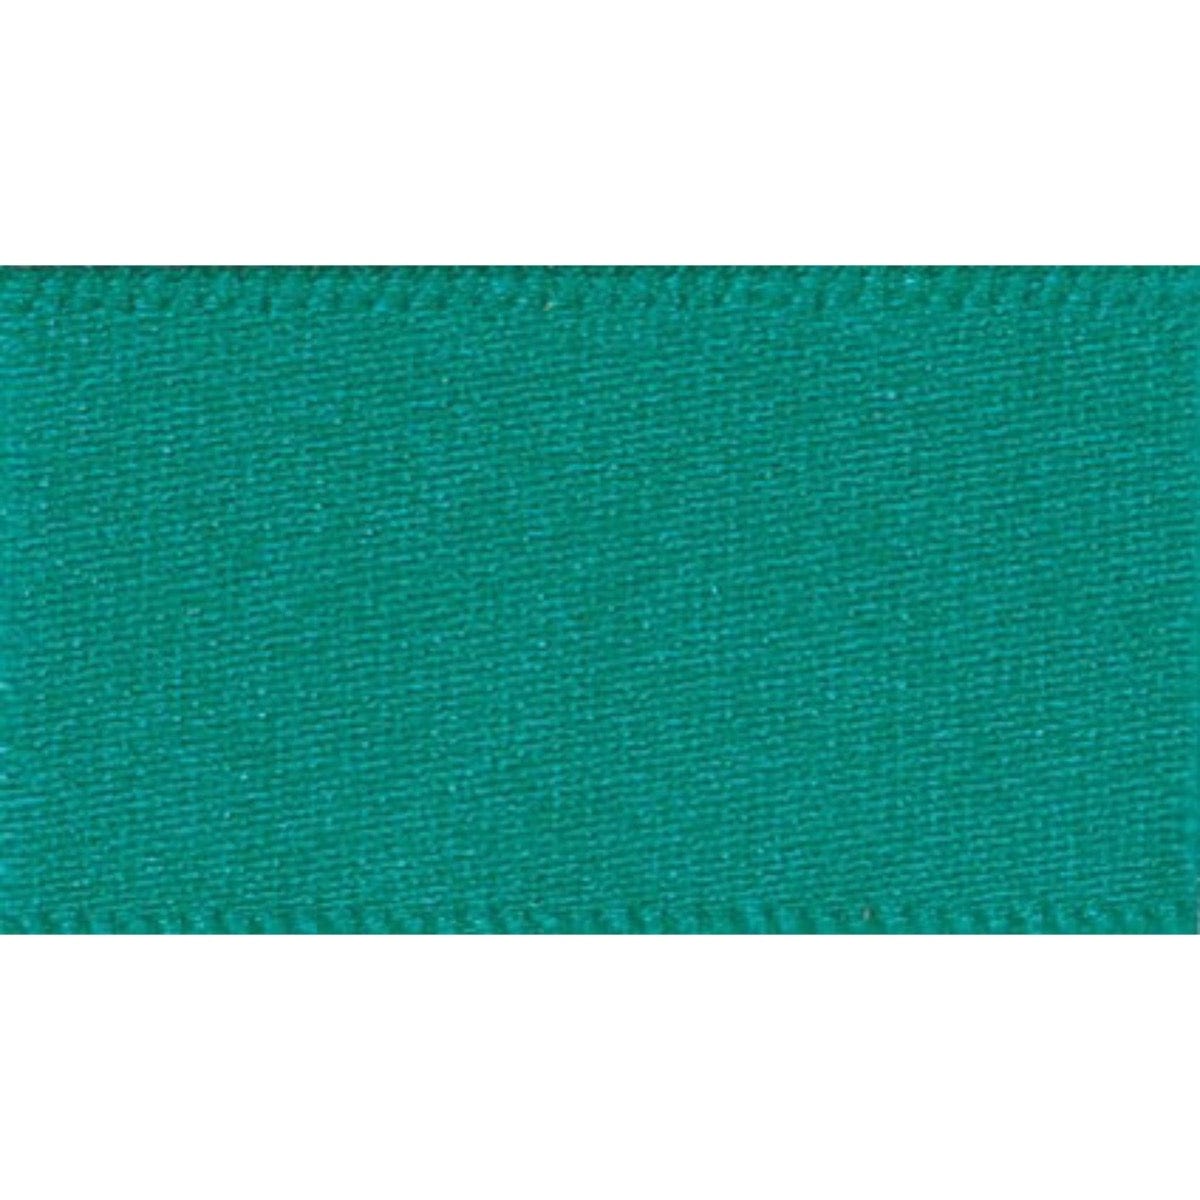 Double Faced Satin Ribbon Jade Green: 3mm wide. Price per metre.